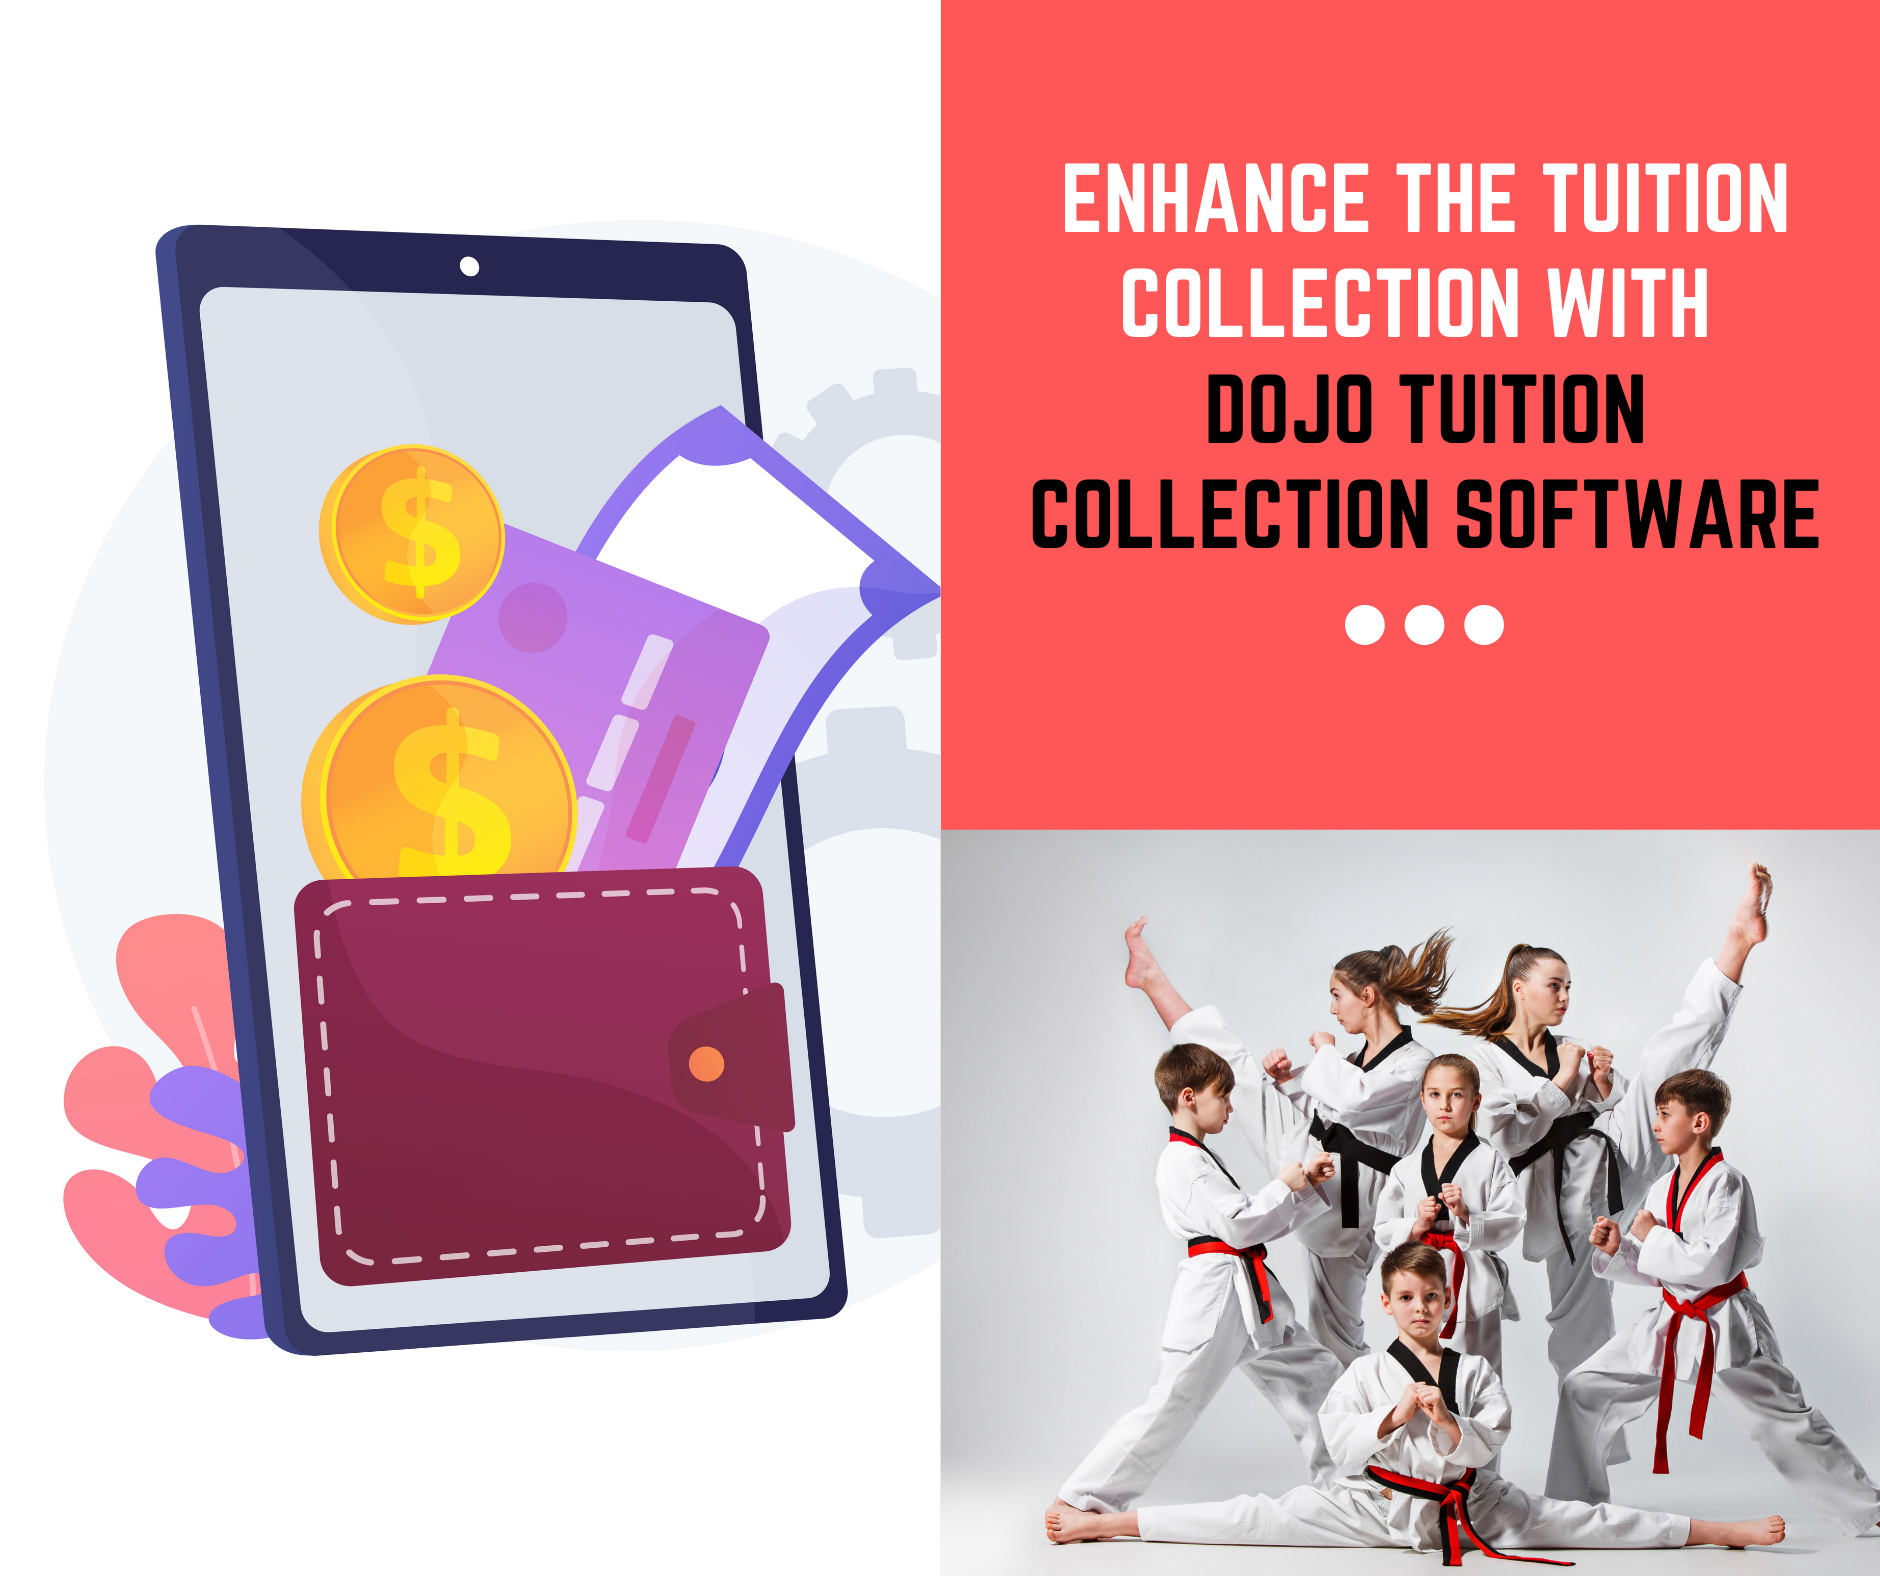 Dojo Tuition Collection Software